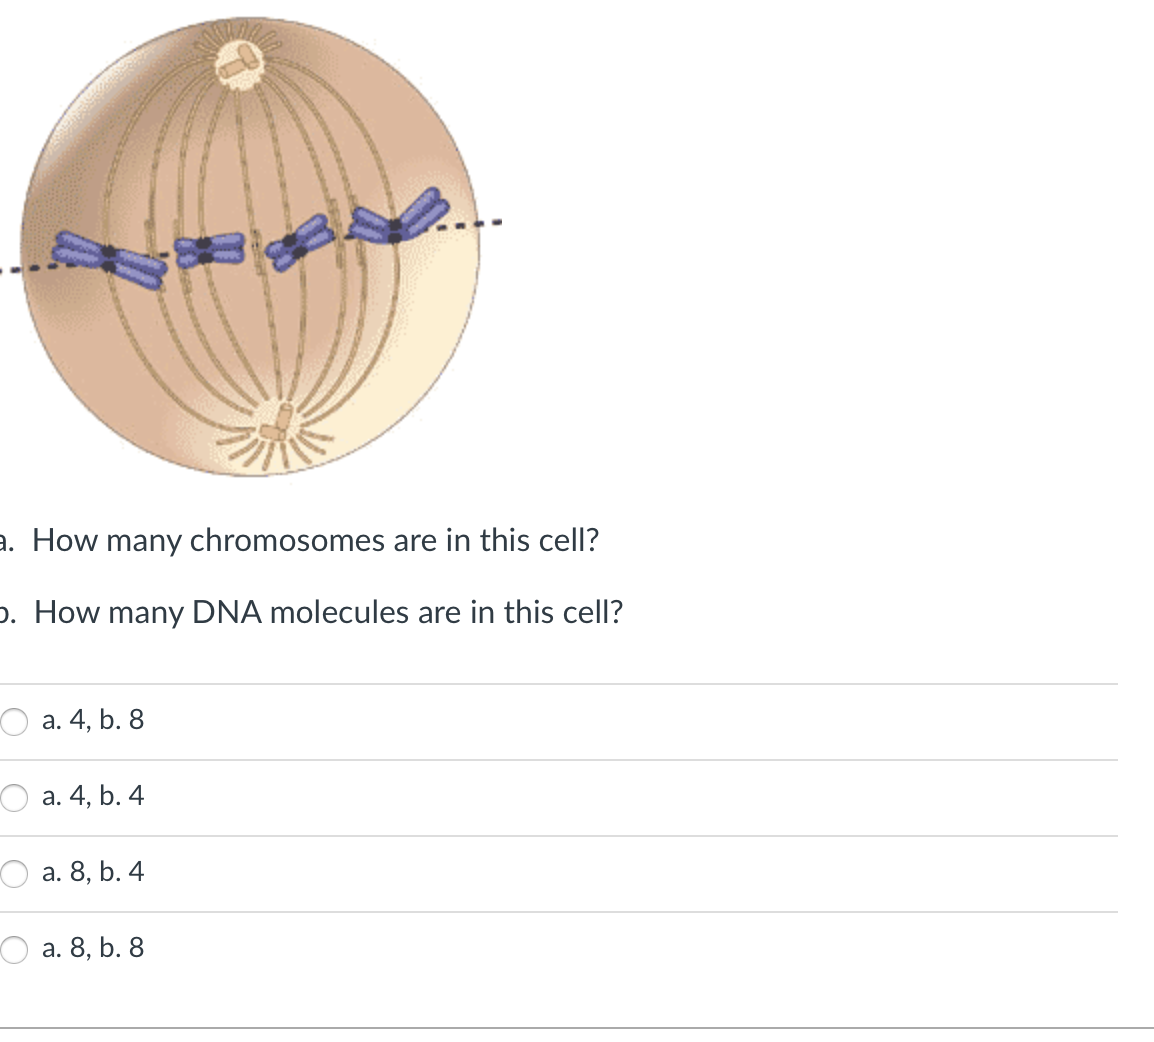 a. How many chromosomes are in this cell?
D. How many DNA molecules are in this cell?
a. 4, b. 8
a. 4, b. 4
a. 8, b. 4
a. 8, b. 8